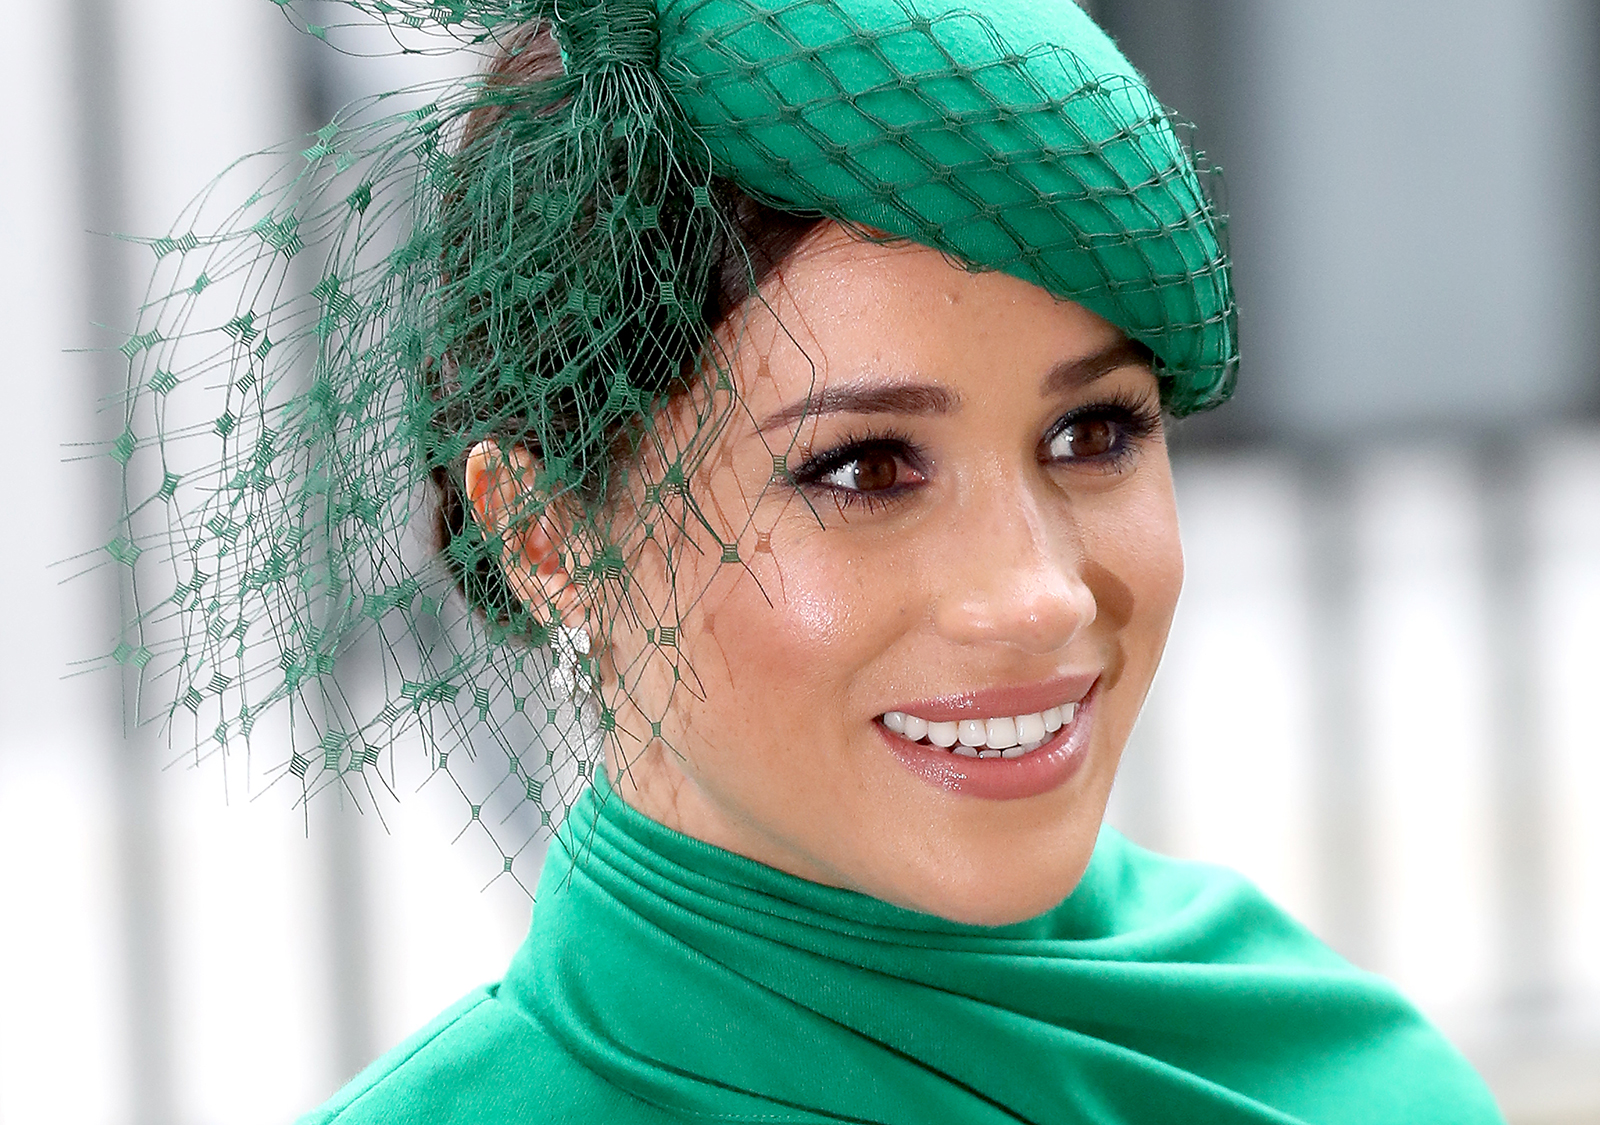 The Duchess of Sussex said: “George Floyd’s life was important”